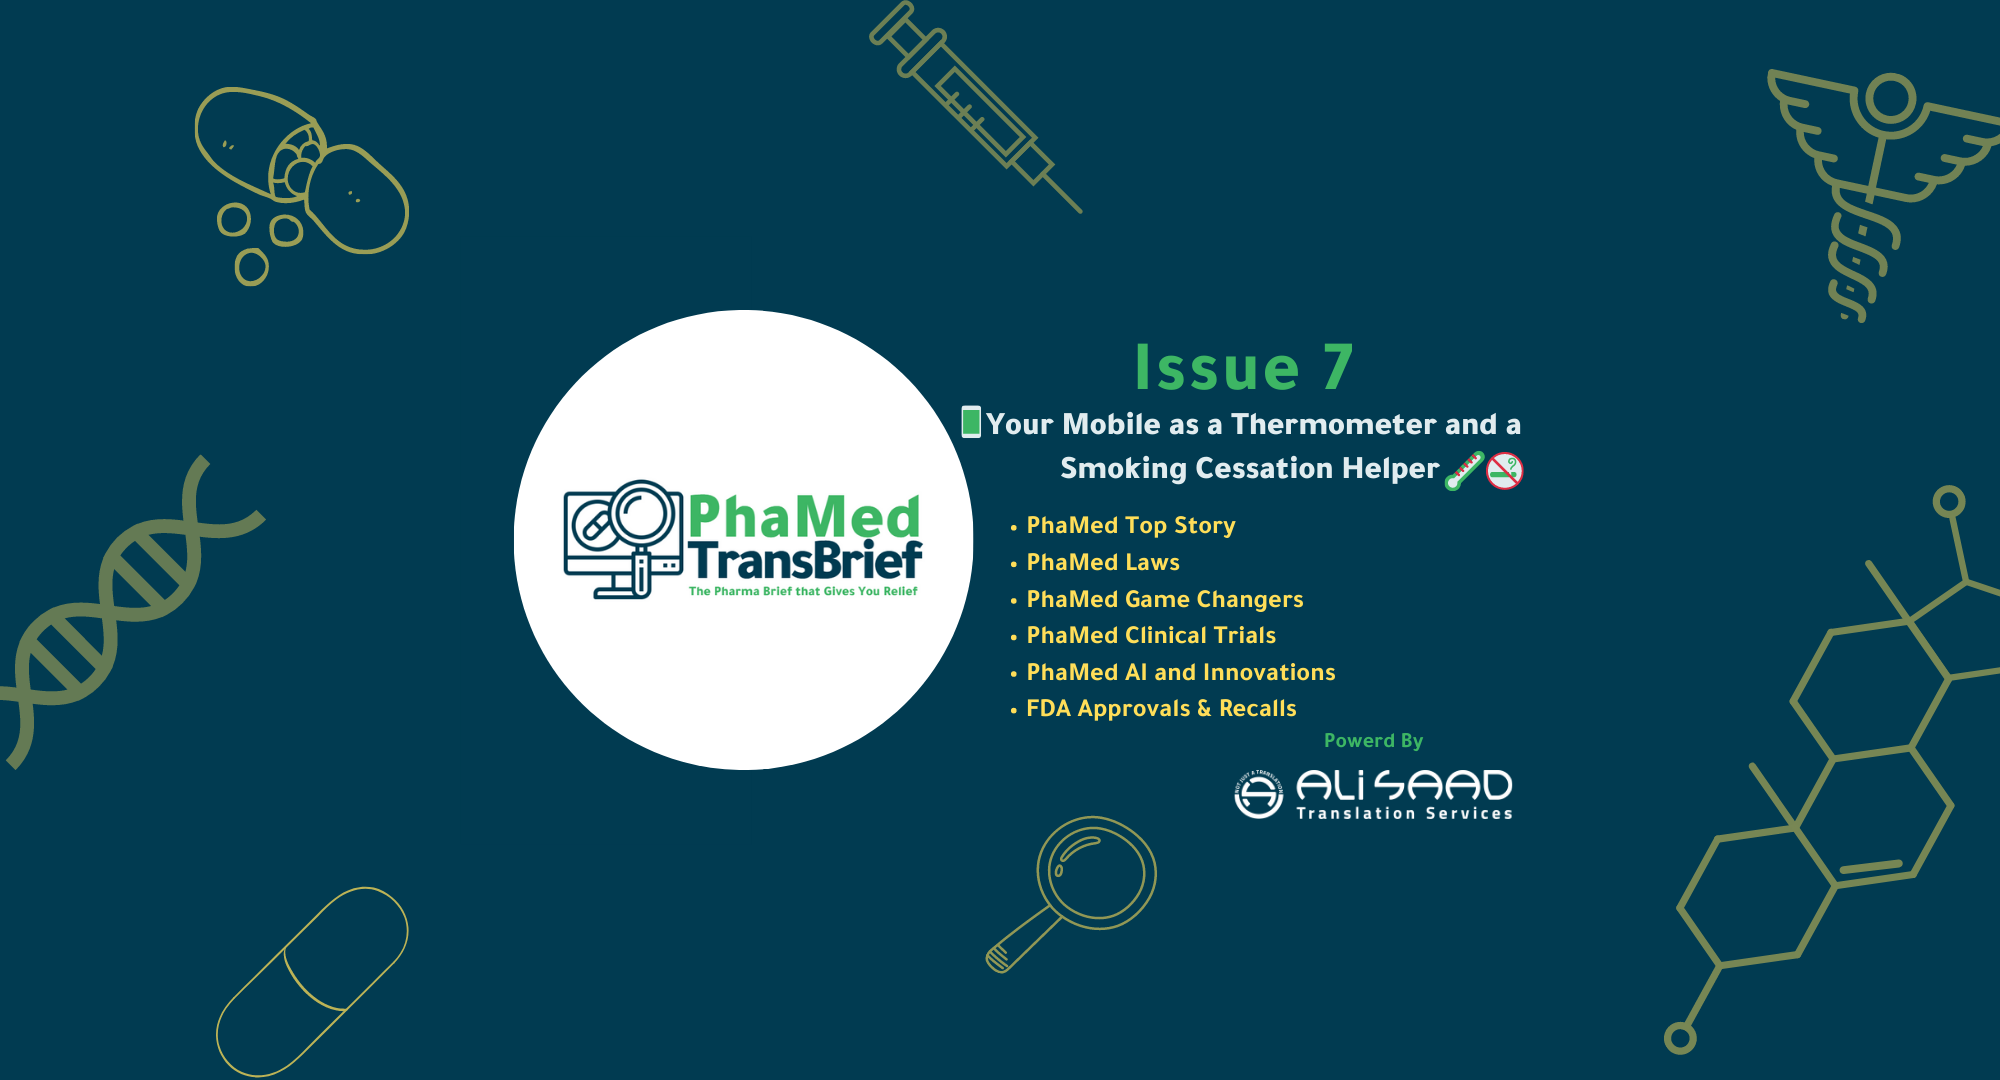 This is the featured image of the PhaMed newsletter issue 7 (Web Version).